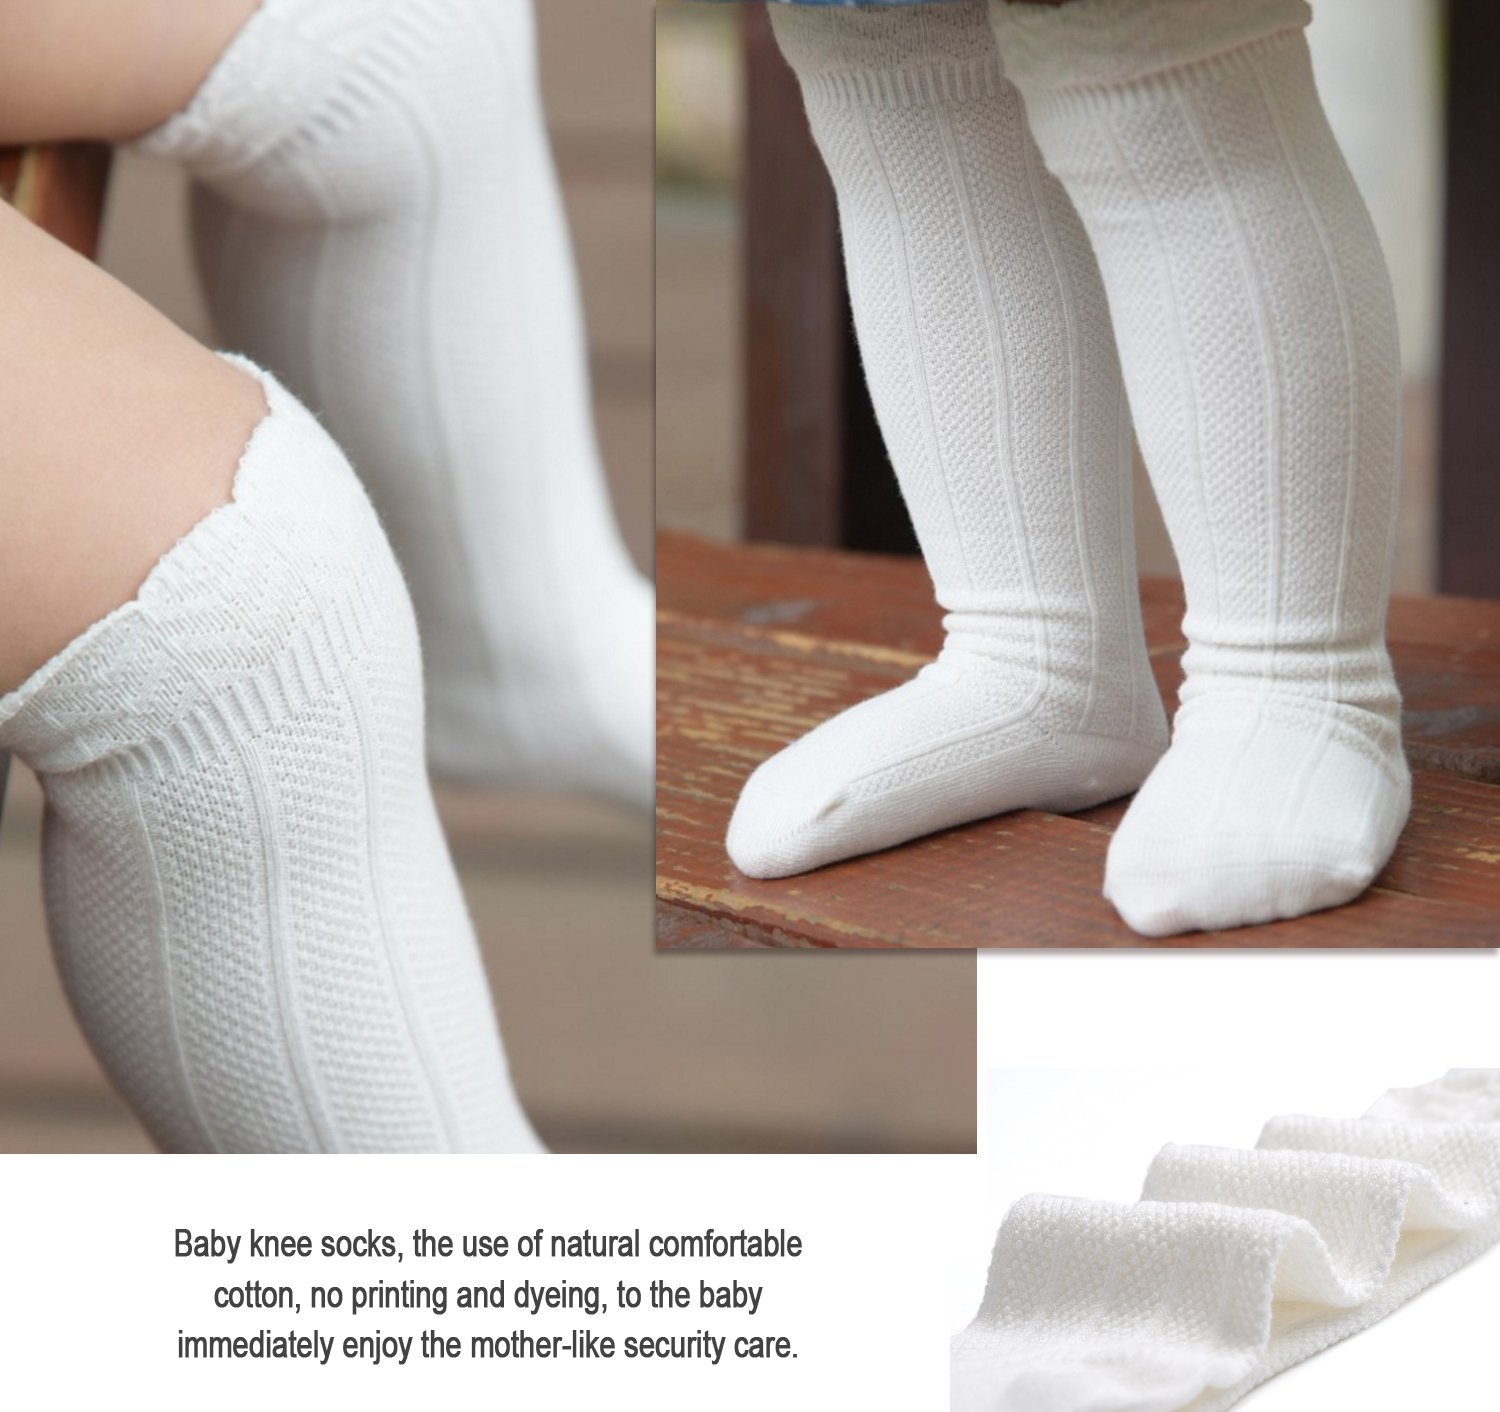 EPEIUS Baby Girls Boys Uniform Knee High Socks Tube Ruffled Stockings Infants and Toddlers (Pack of 3/5)